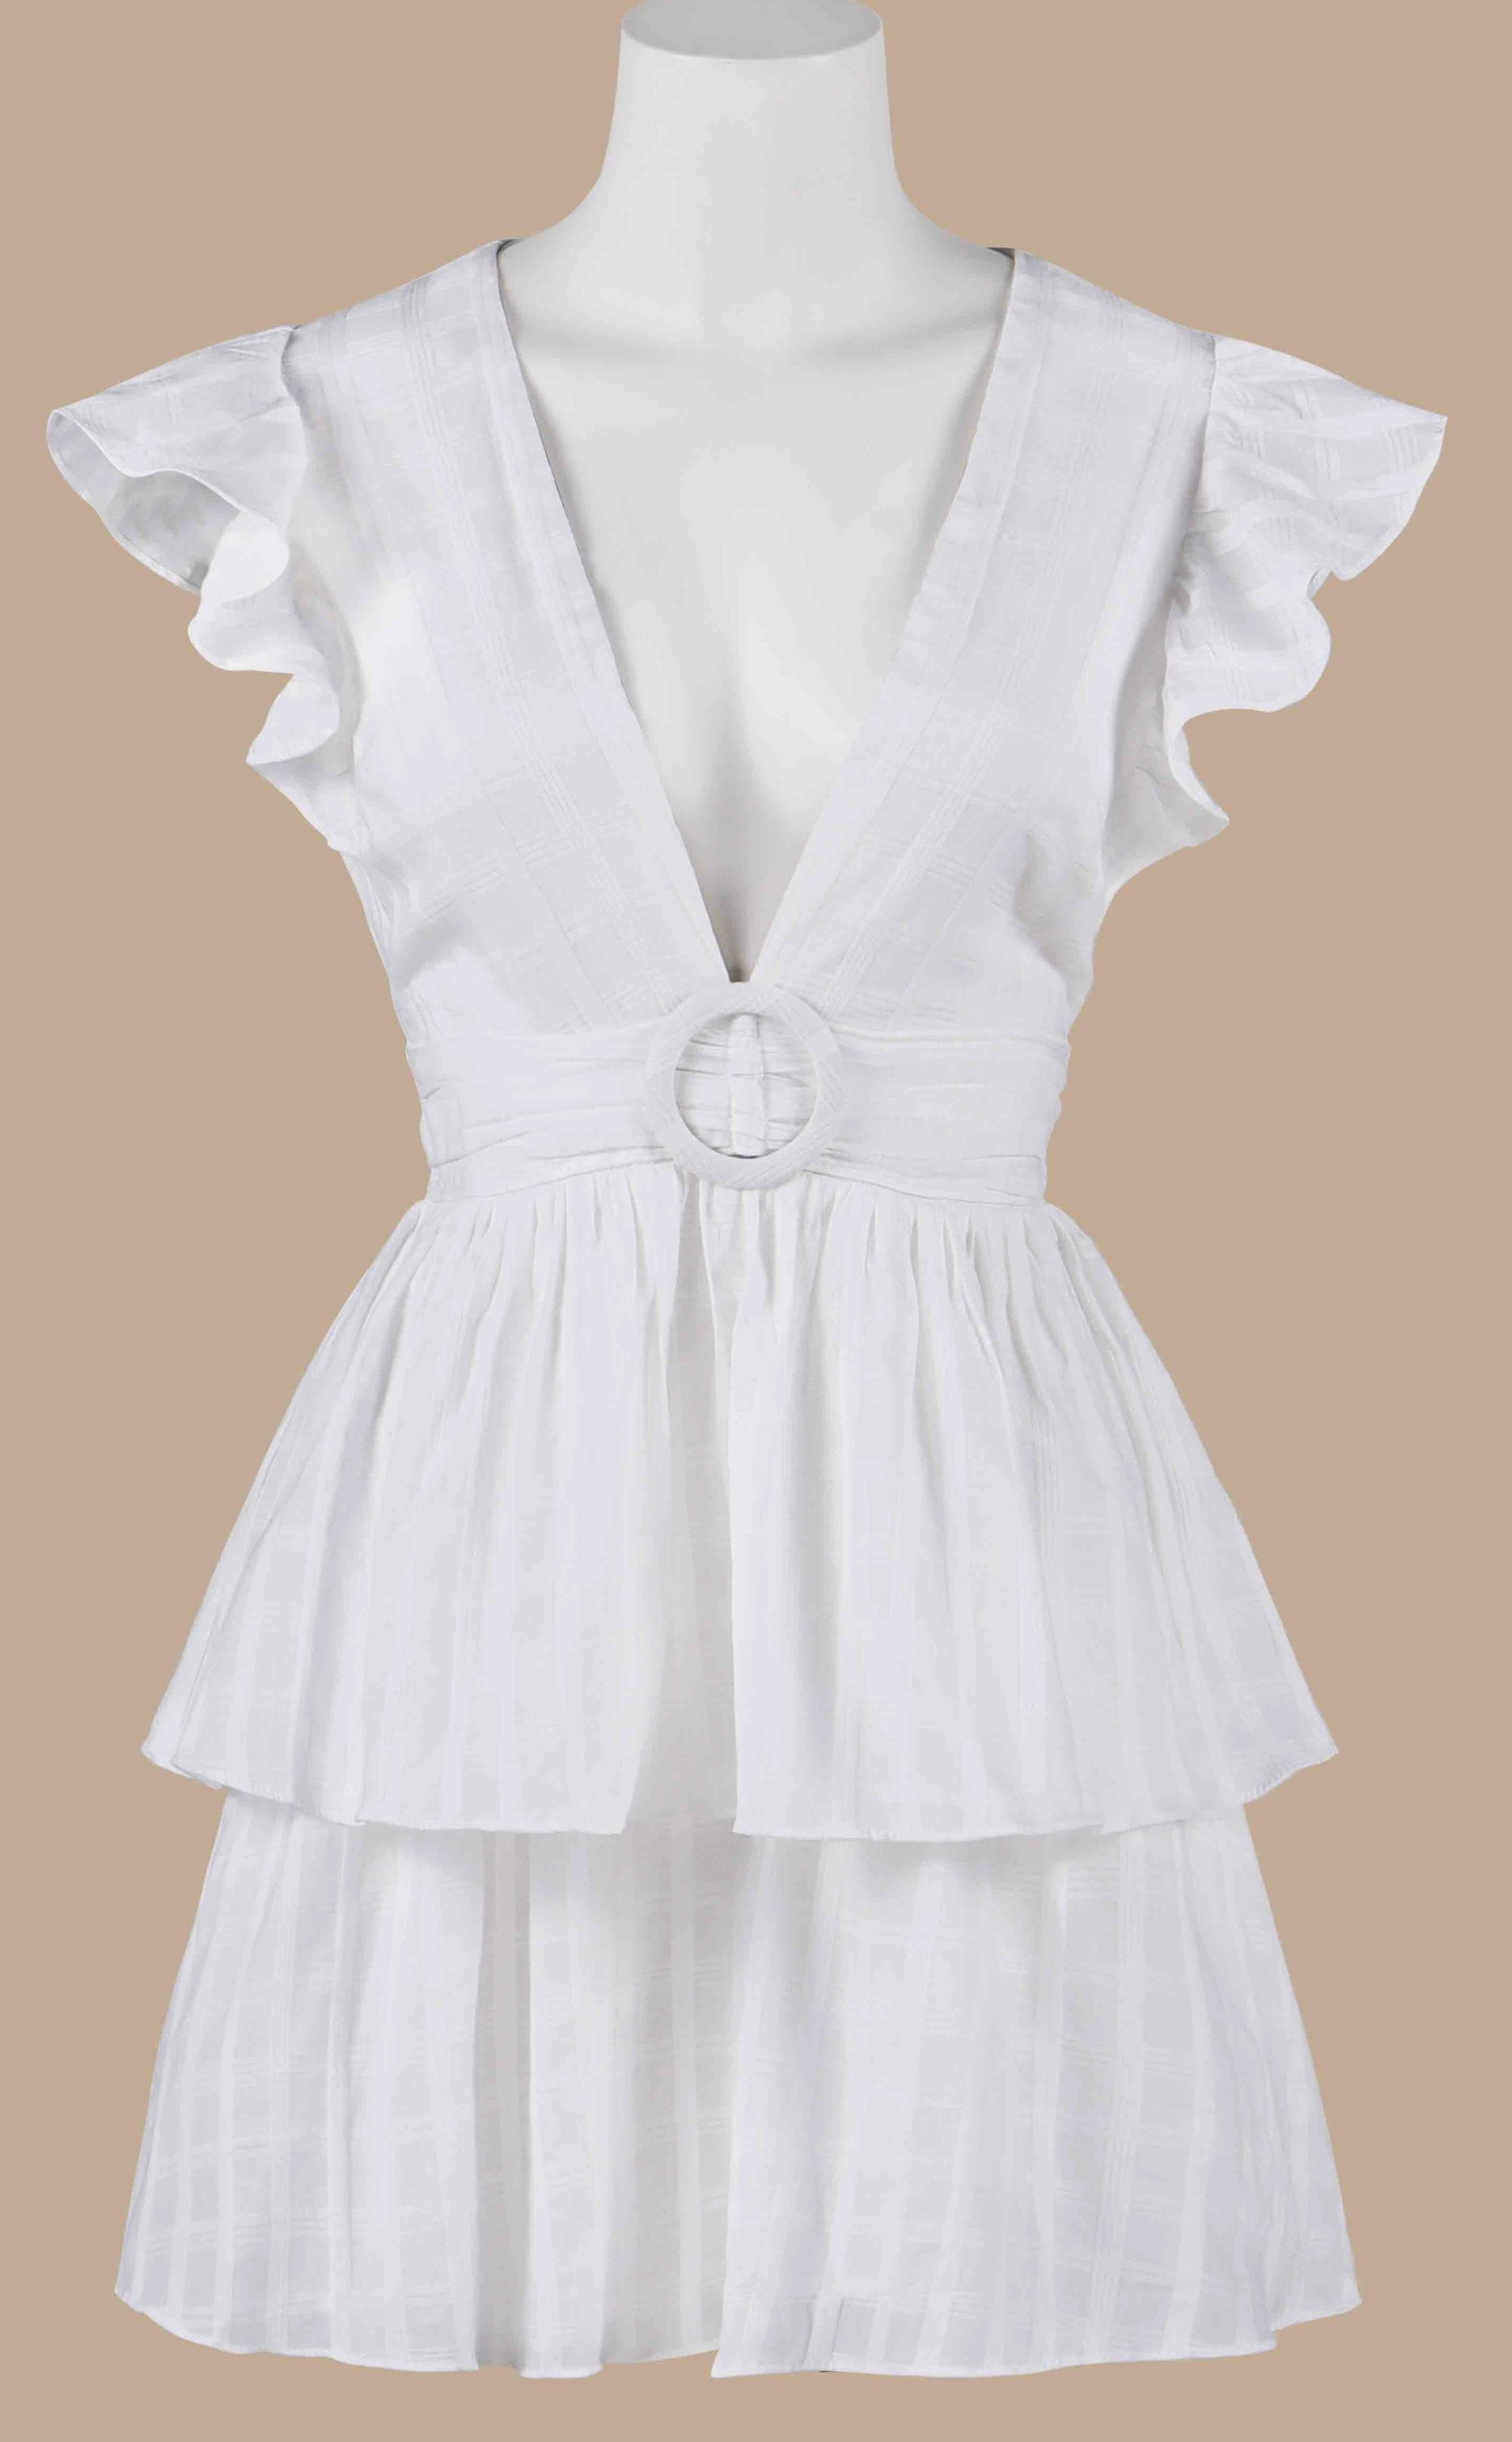 Two Tiered Ruffle Dress in White